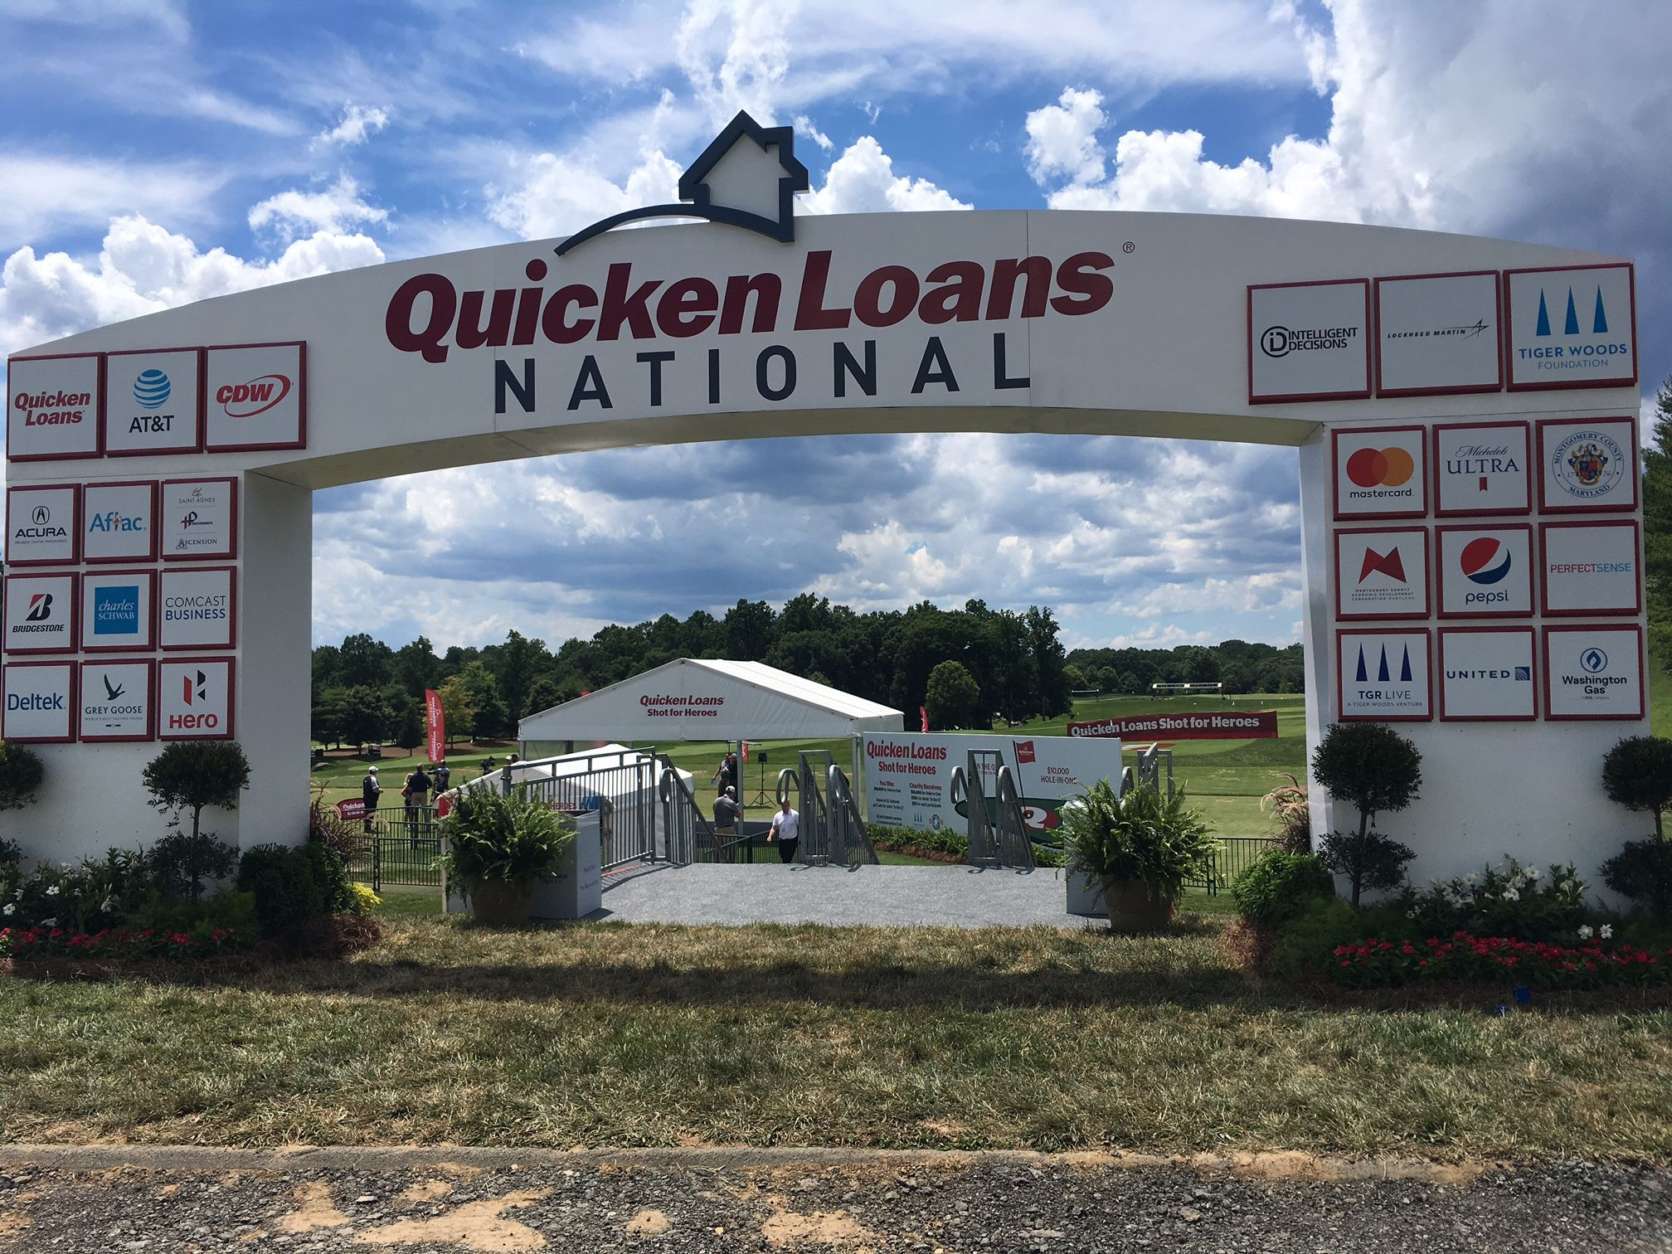 The entrance to the Quicken Loans National takes you right to the Shot for Heroes, a chance to win $10,000 for charity and for yourself. (WTOP/Noah Frank)